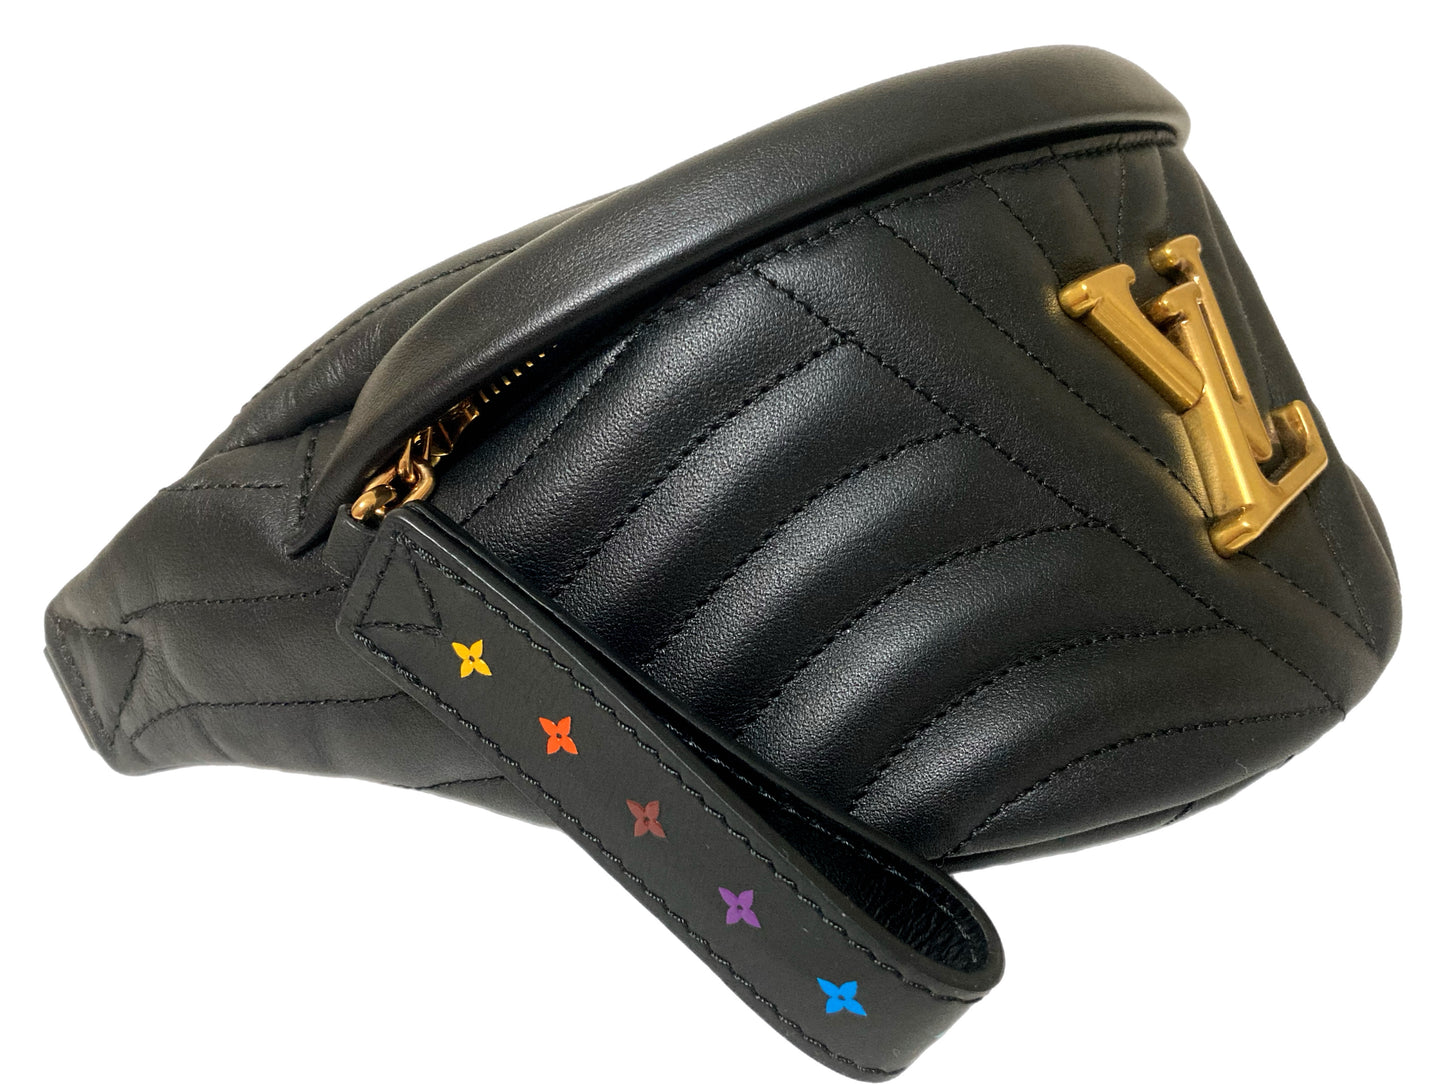 LOUIS VUITTON Leather Quilted Fanny Pack Black